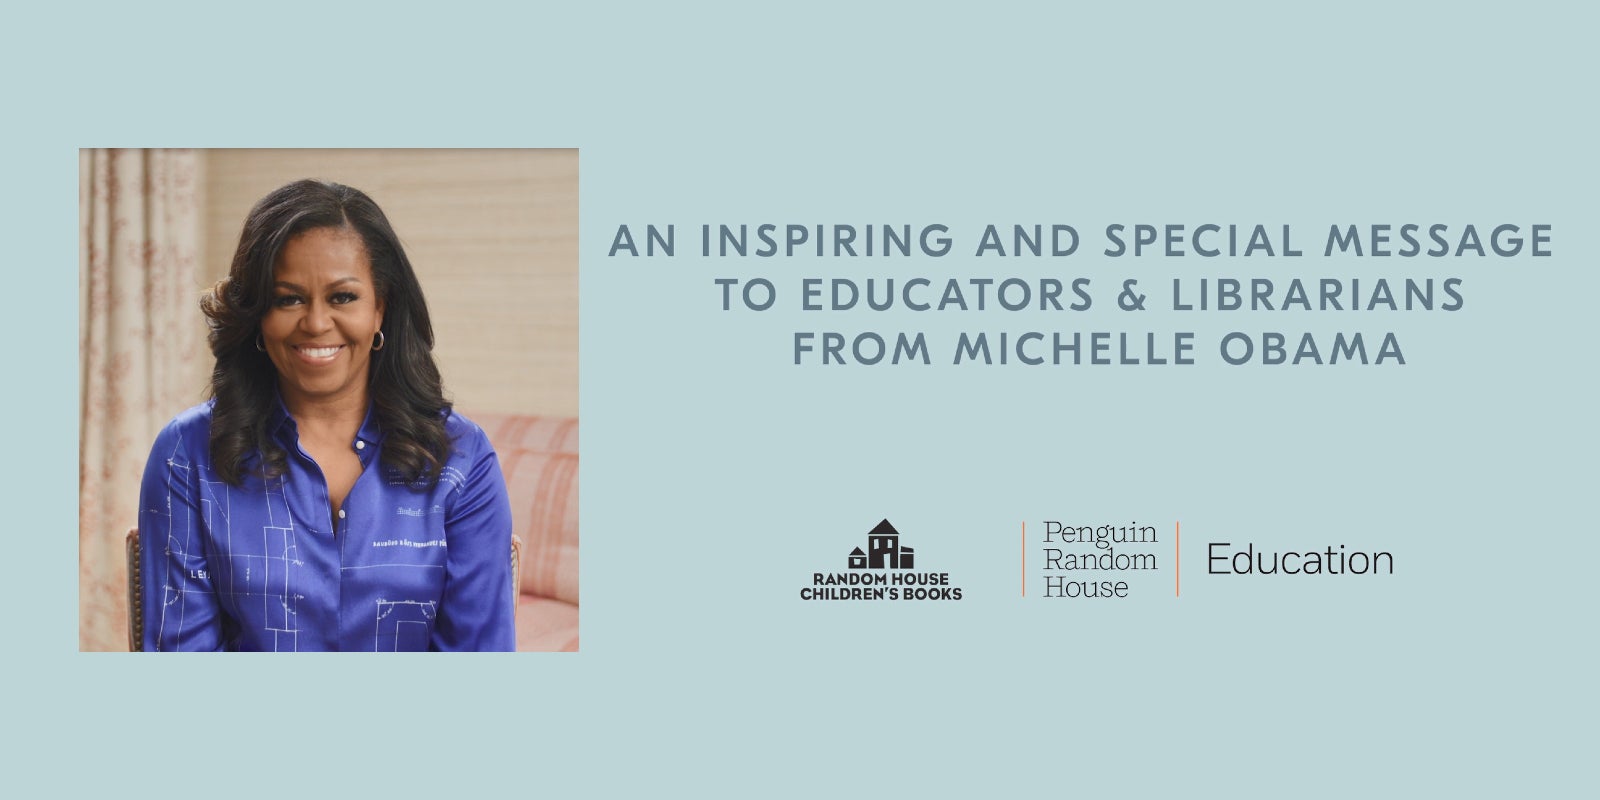 A Special Message to Educators & Librarians from Michelle Obama